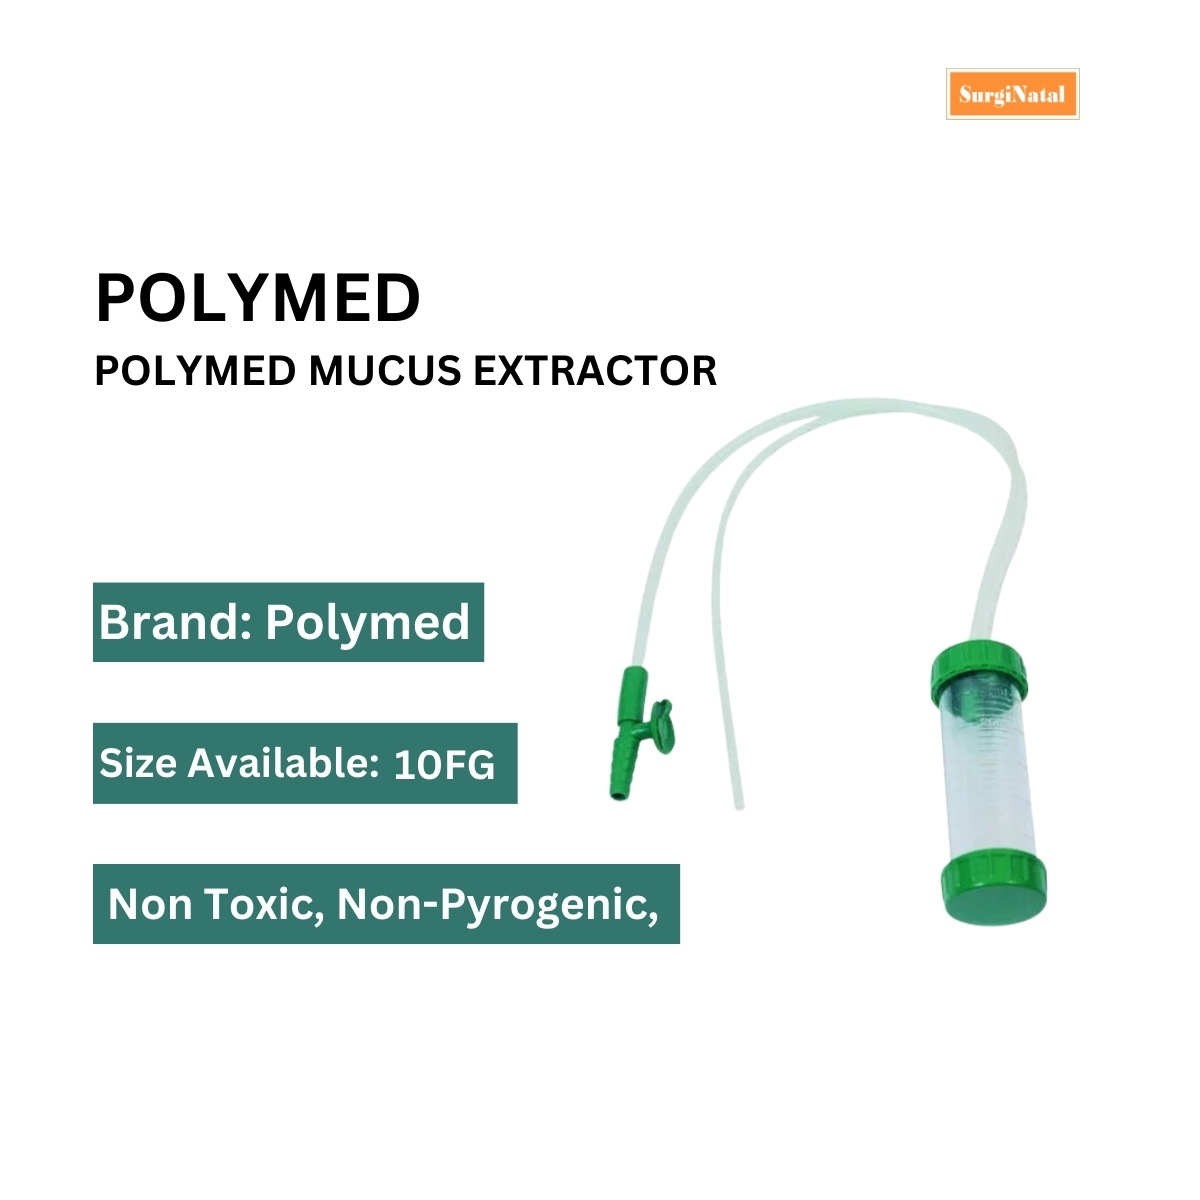  mucus extractor uses